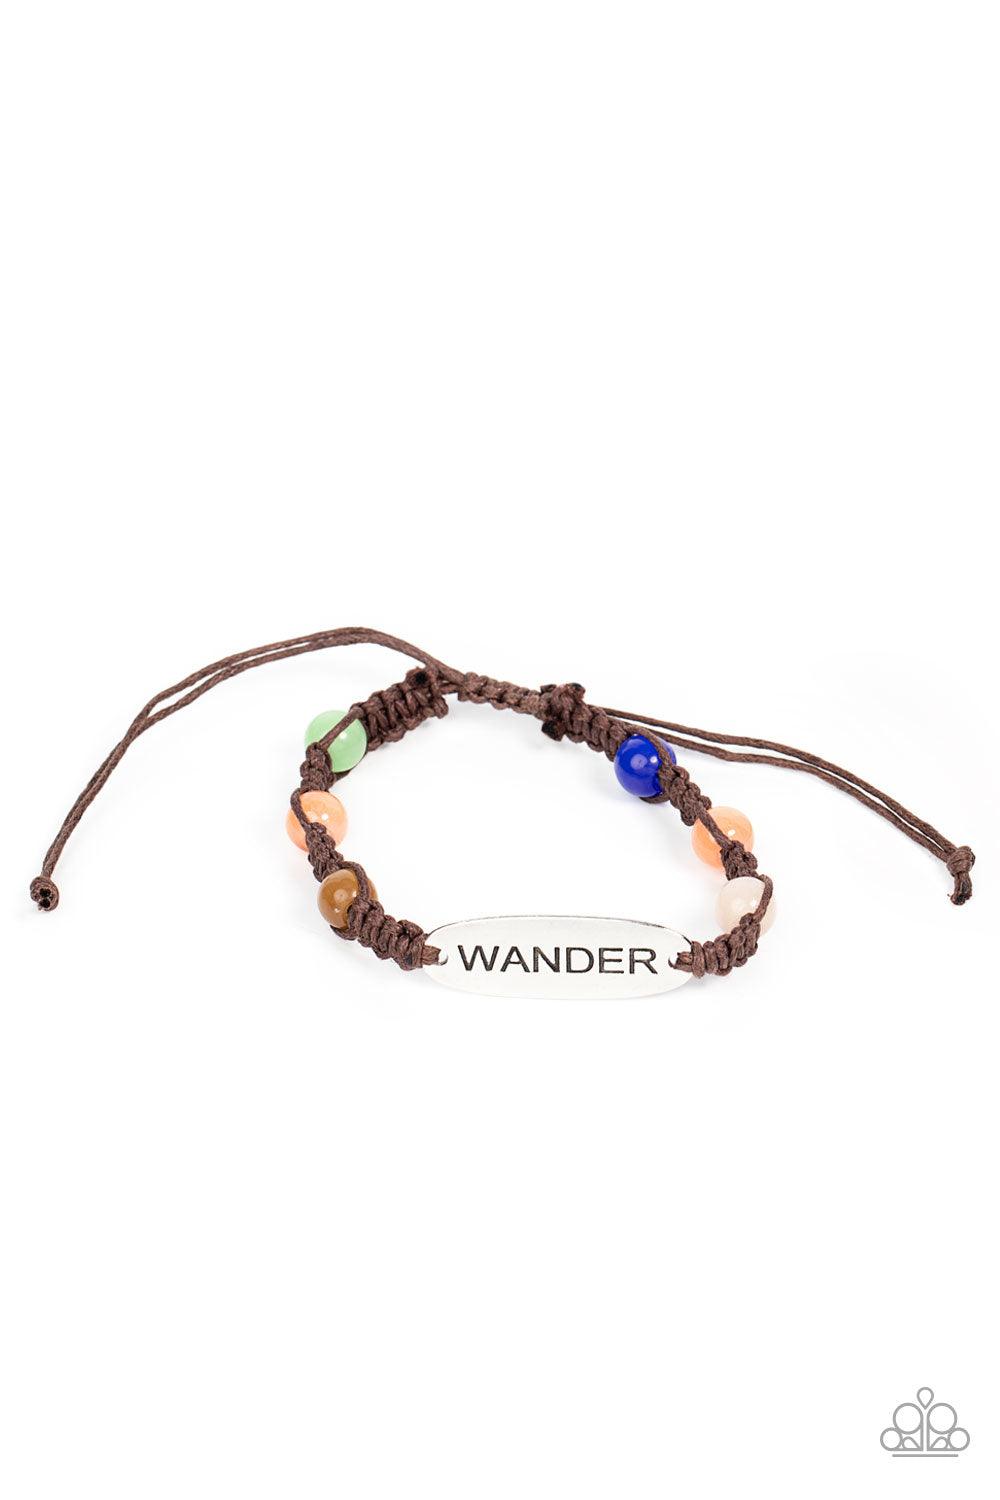 Paparazzi Accessories Roaming For Days - Multi Glassy multicolored cat's eye stone beads are knotted in place along a strand of braided brown cording that attaches to a silver centerpiece stamped in the word, "Wander," for a free-spirited fashion. Feature